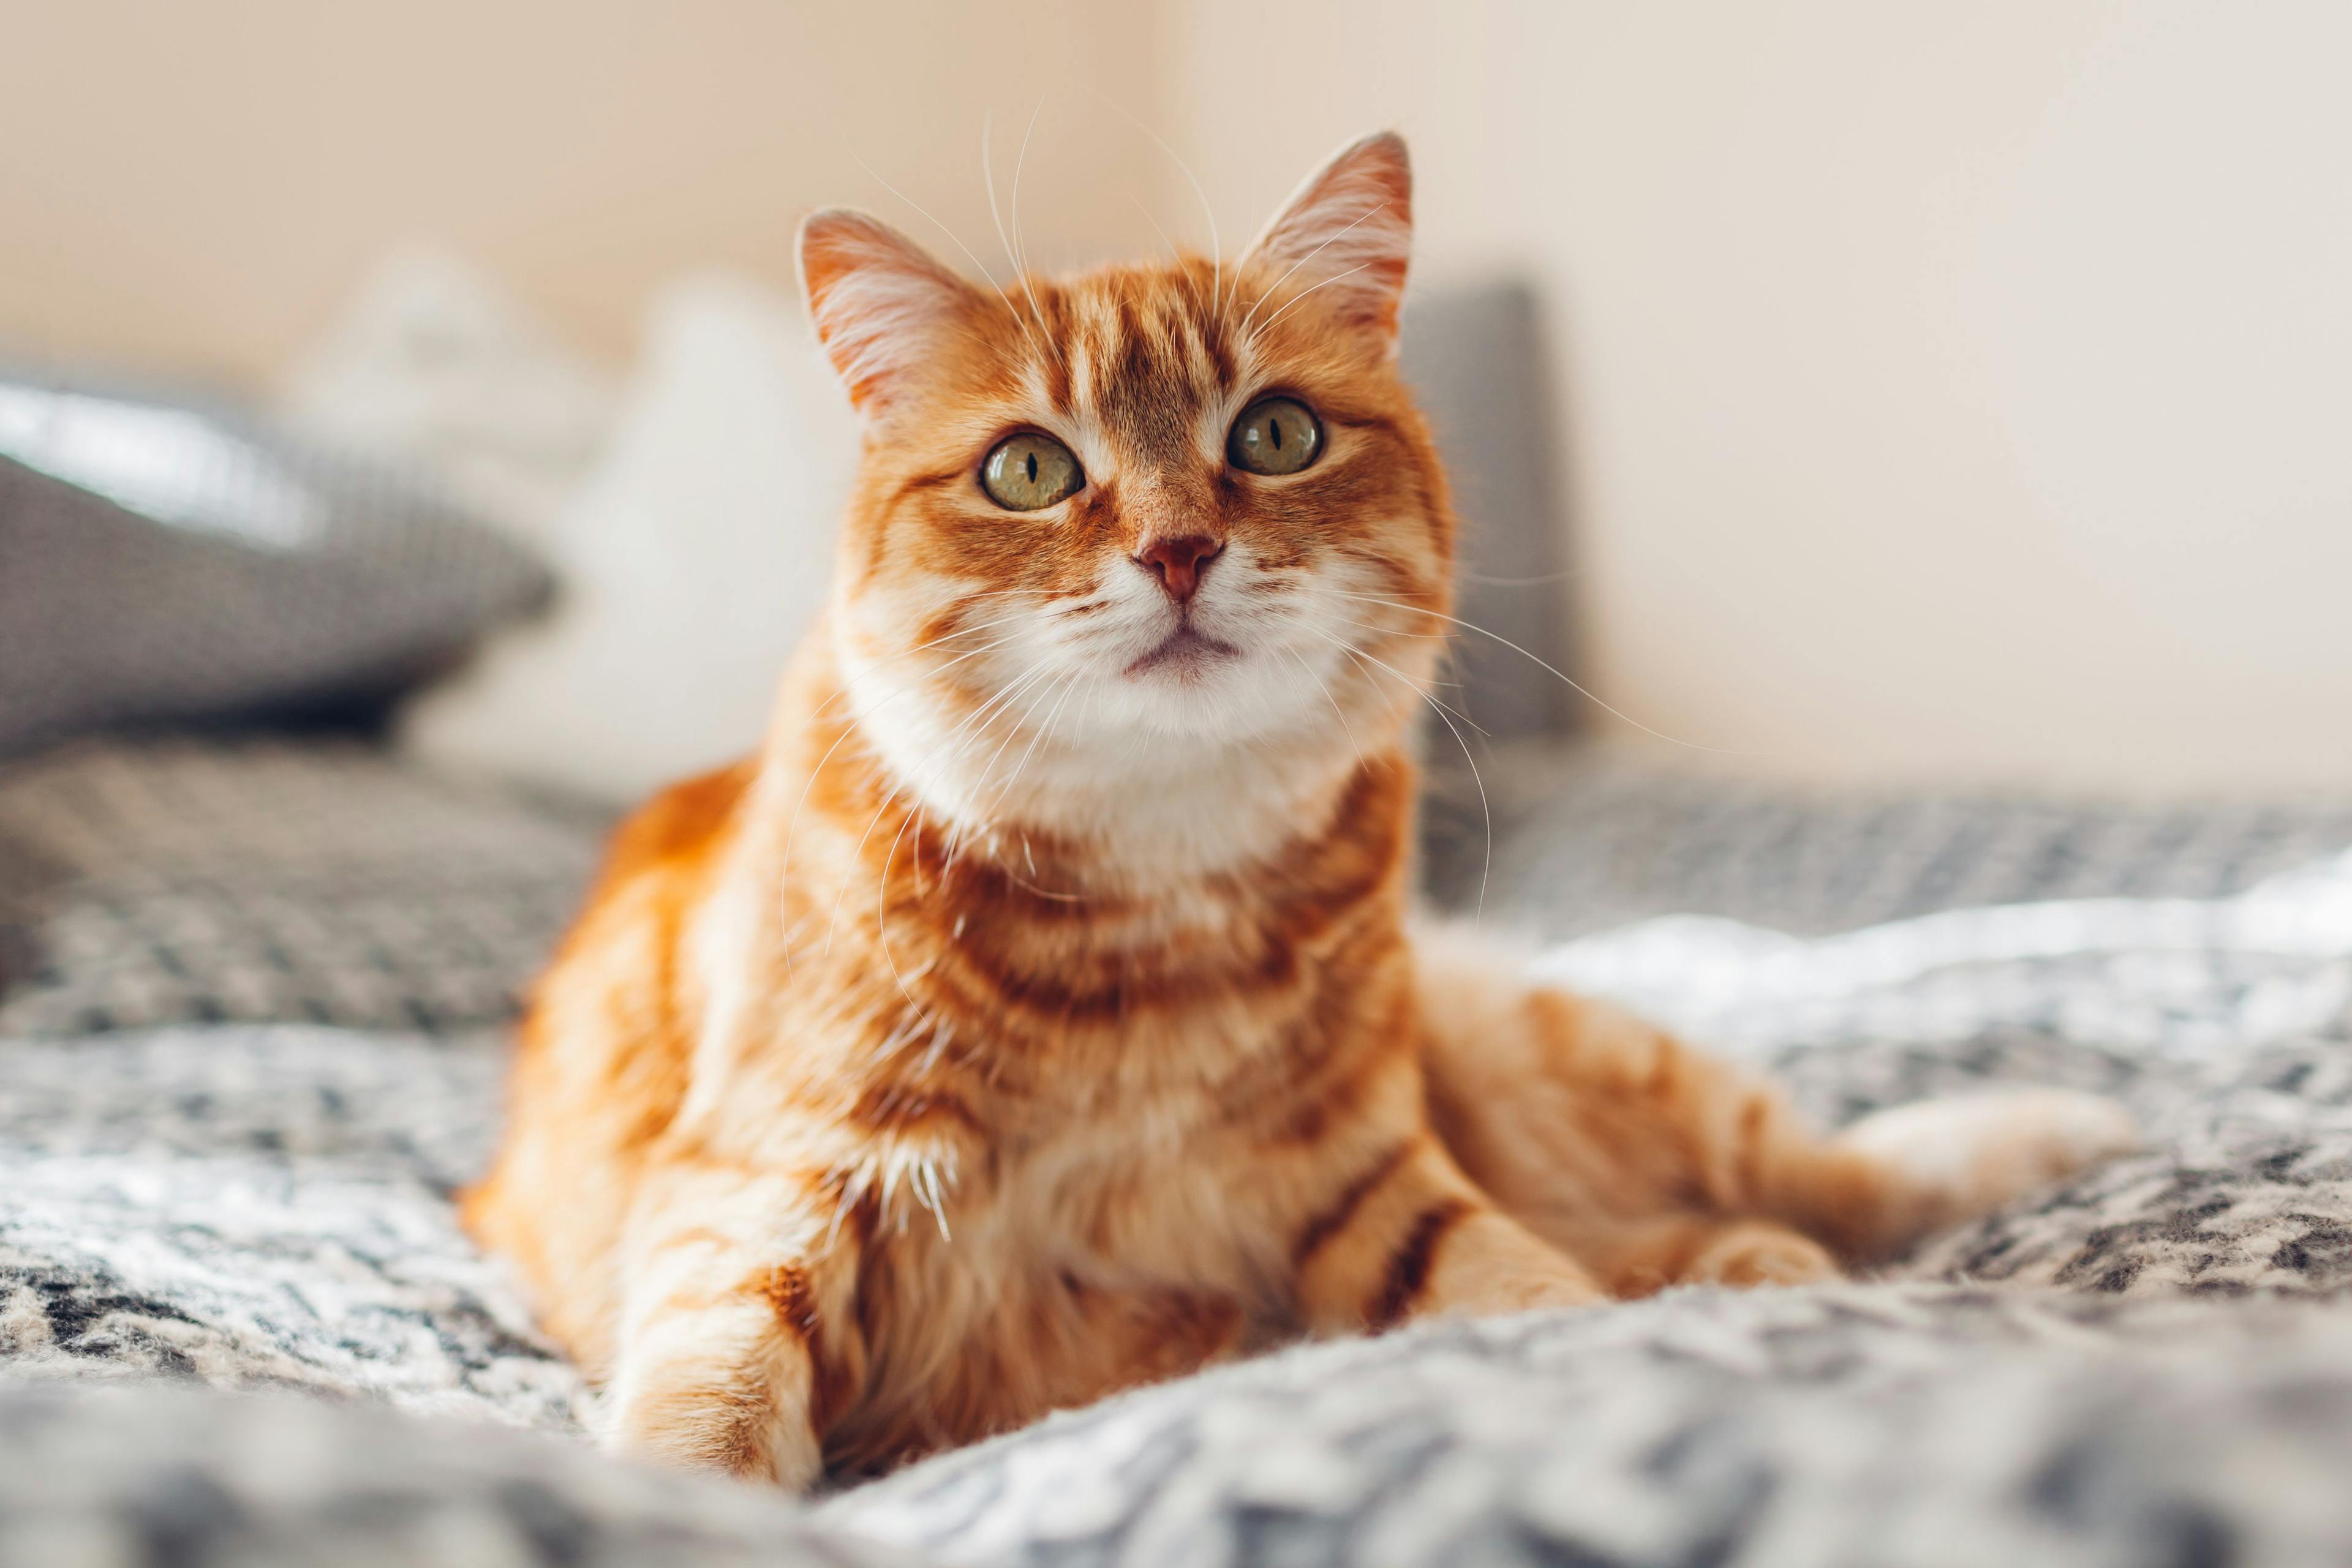 Improving medication compliance for felines with diabetes